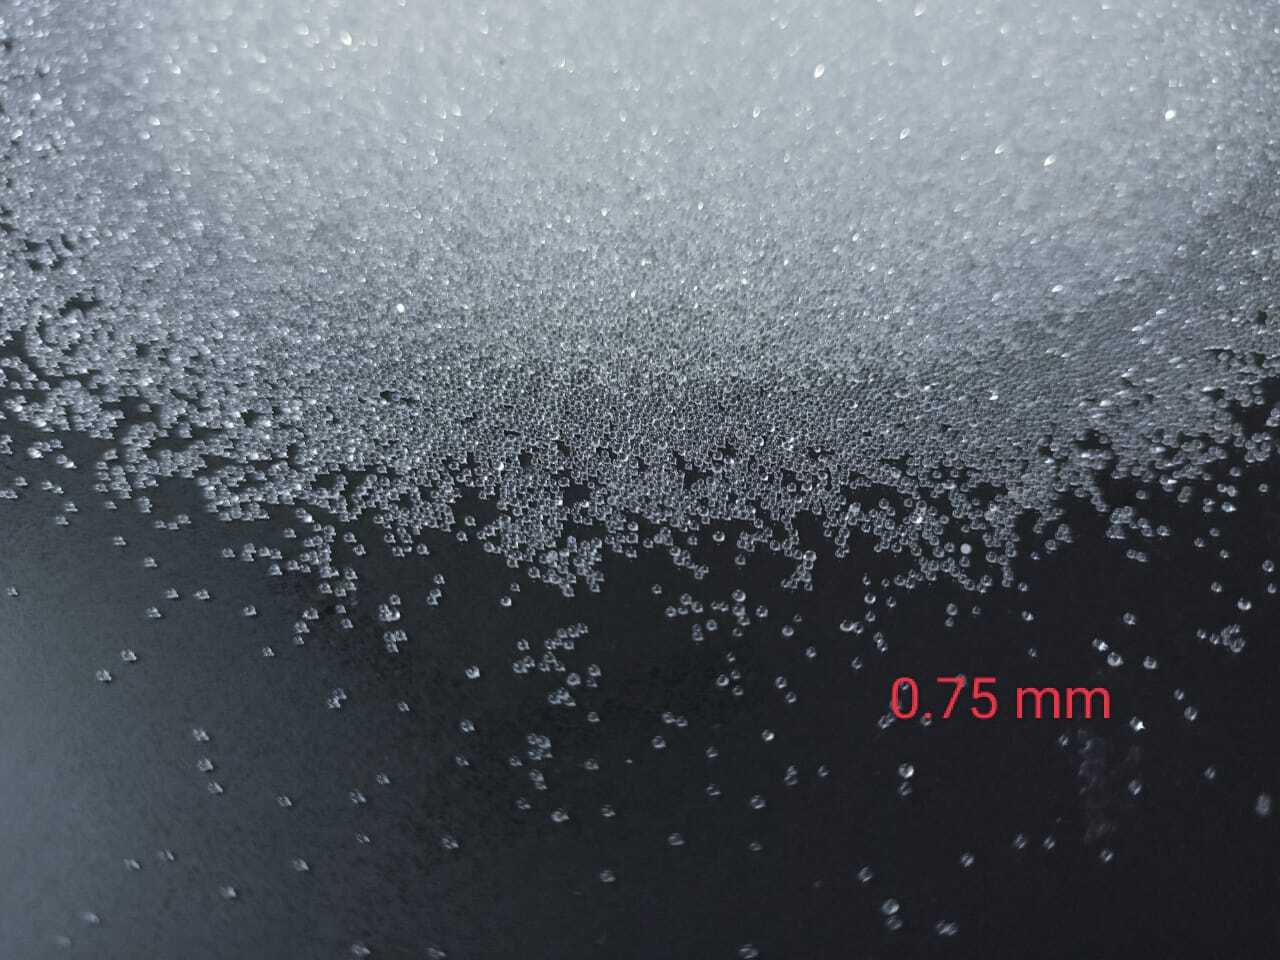 granular grain road safty shine road marking industial paint filler 100 reflative light glass sand and road marking glass beads